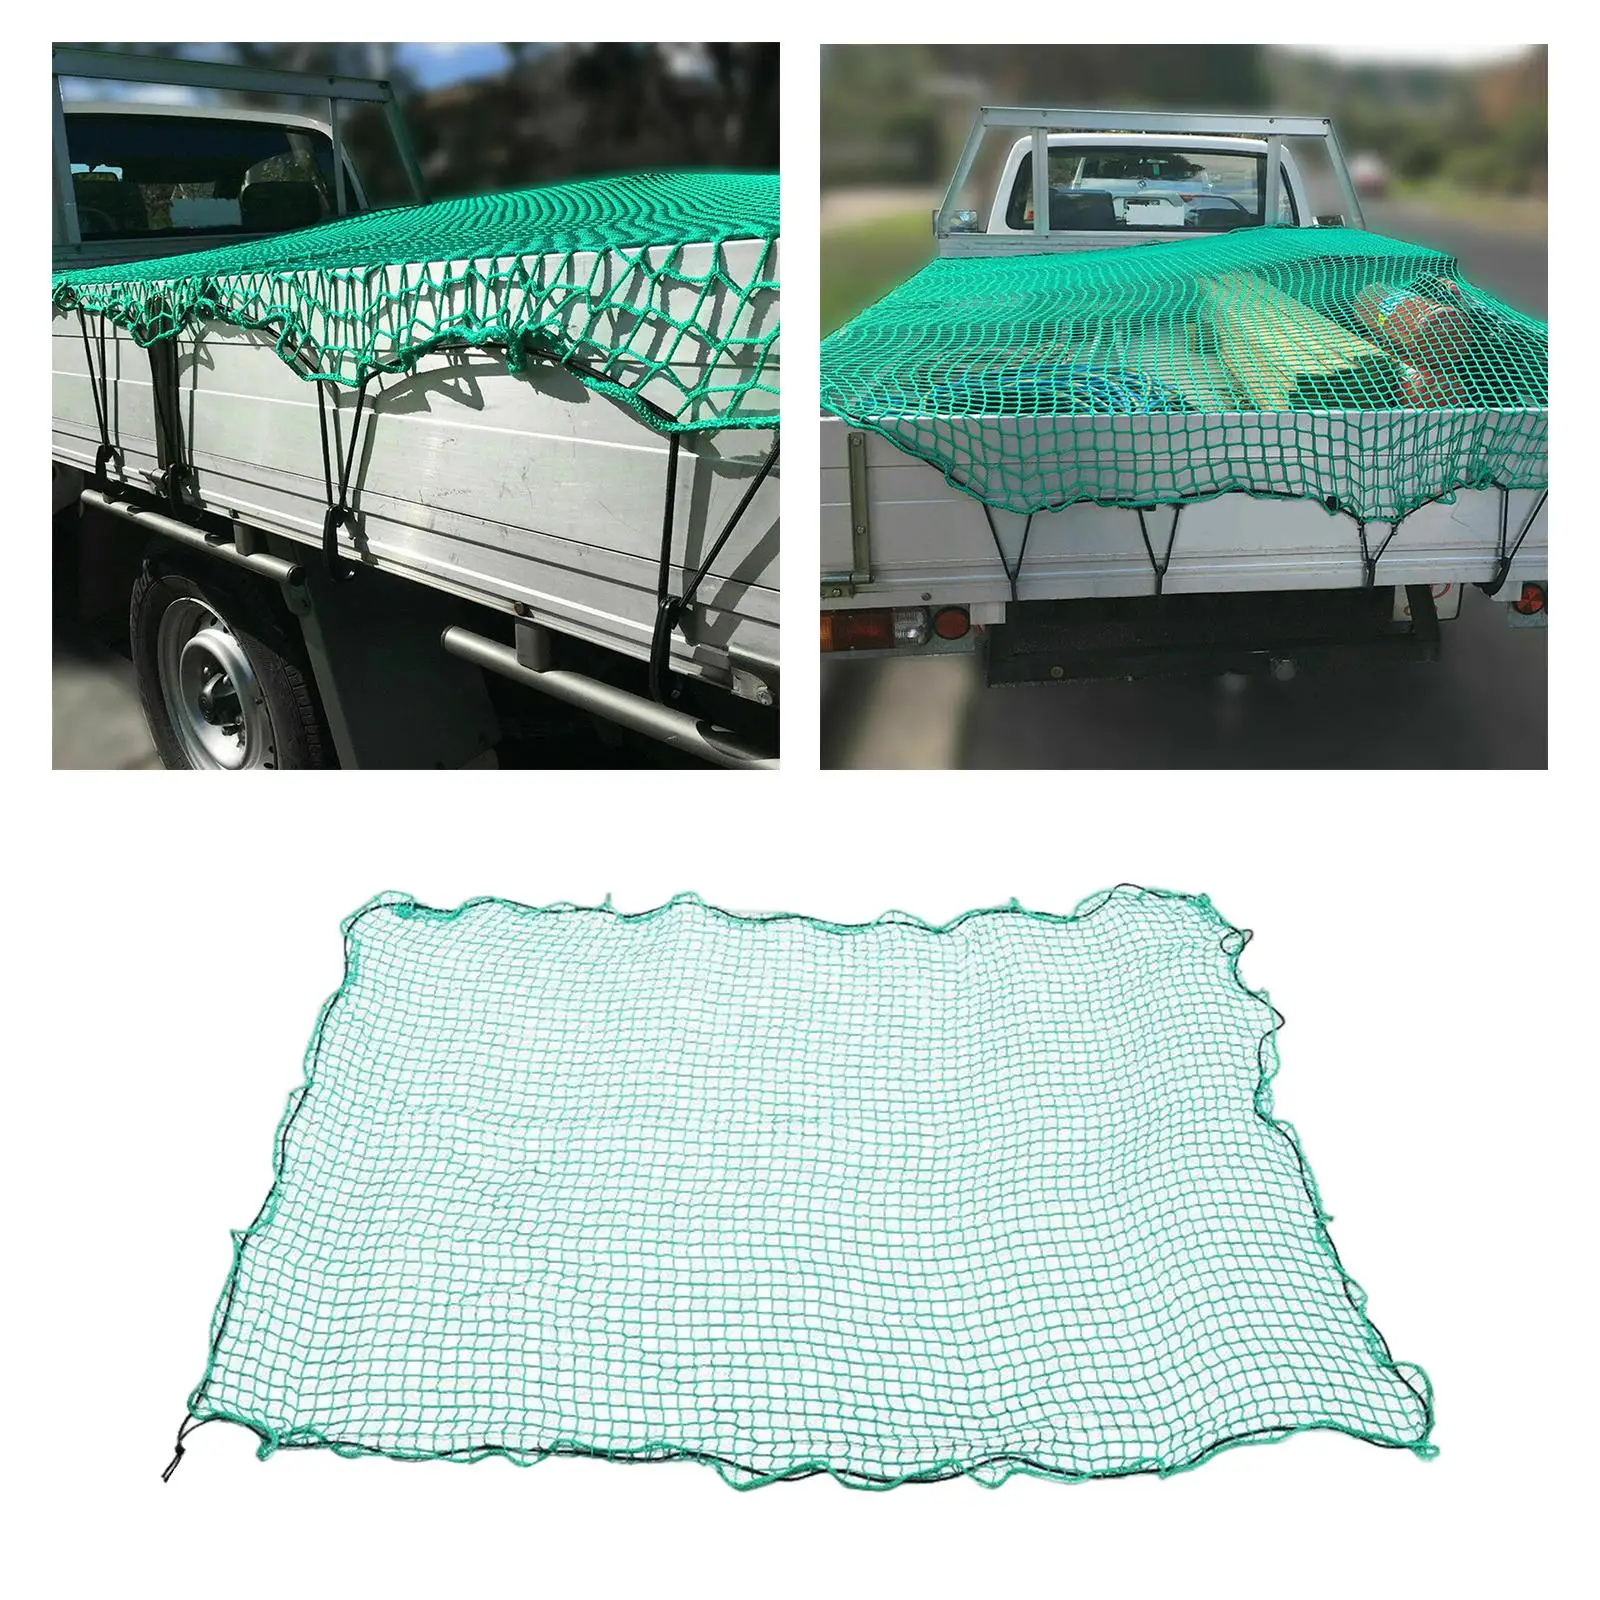 Truck Bed Cargo Net 6.5` x 9.8` Pickup Small Mesh Holes Stretchable Bungee Cargo Net Car Storage Net for SUV Car Truck Bed